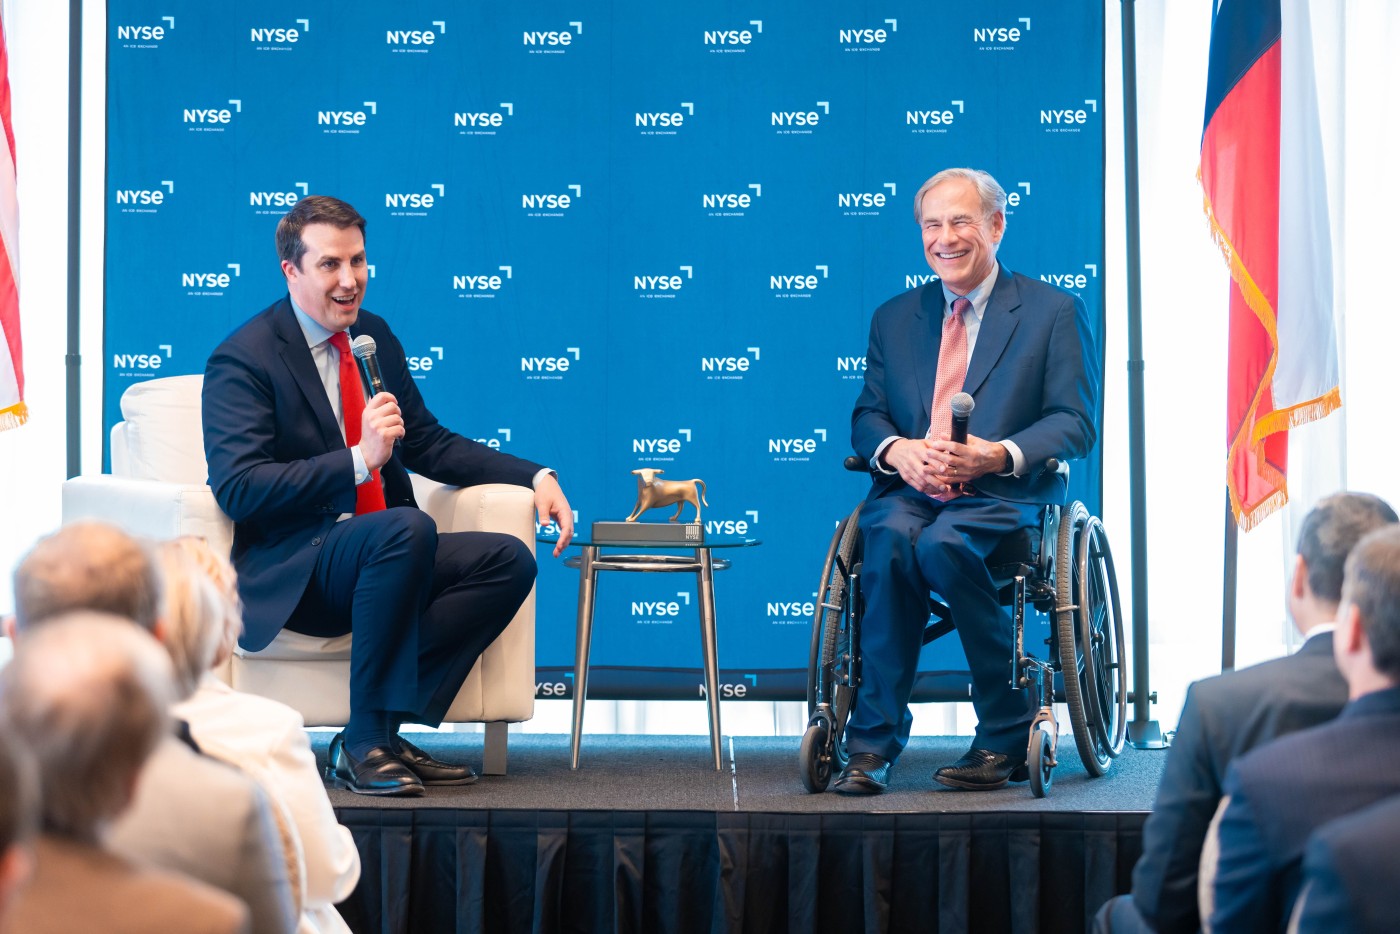 Governor Abbott Highlights Texas’ Business-Friendly Environment at NYSE Fireside Chat